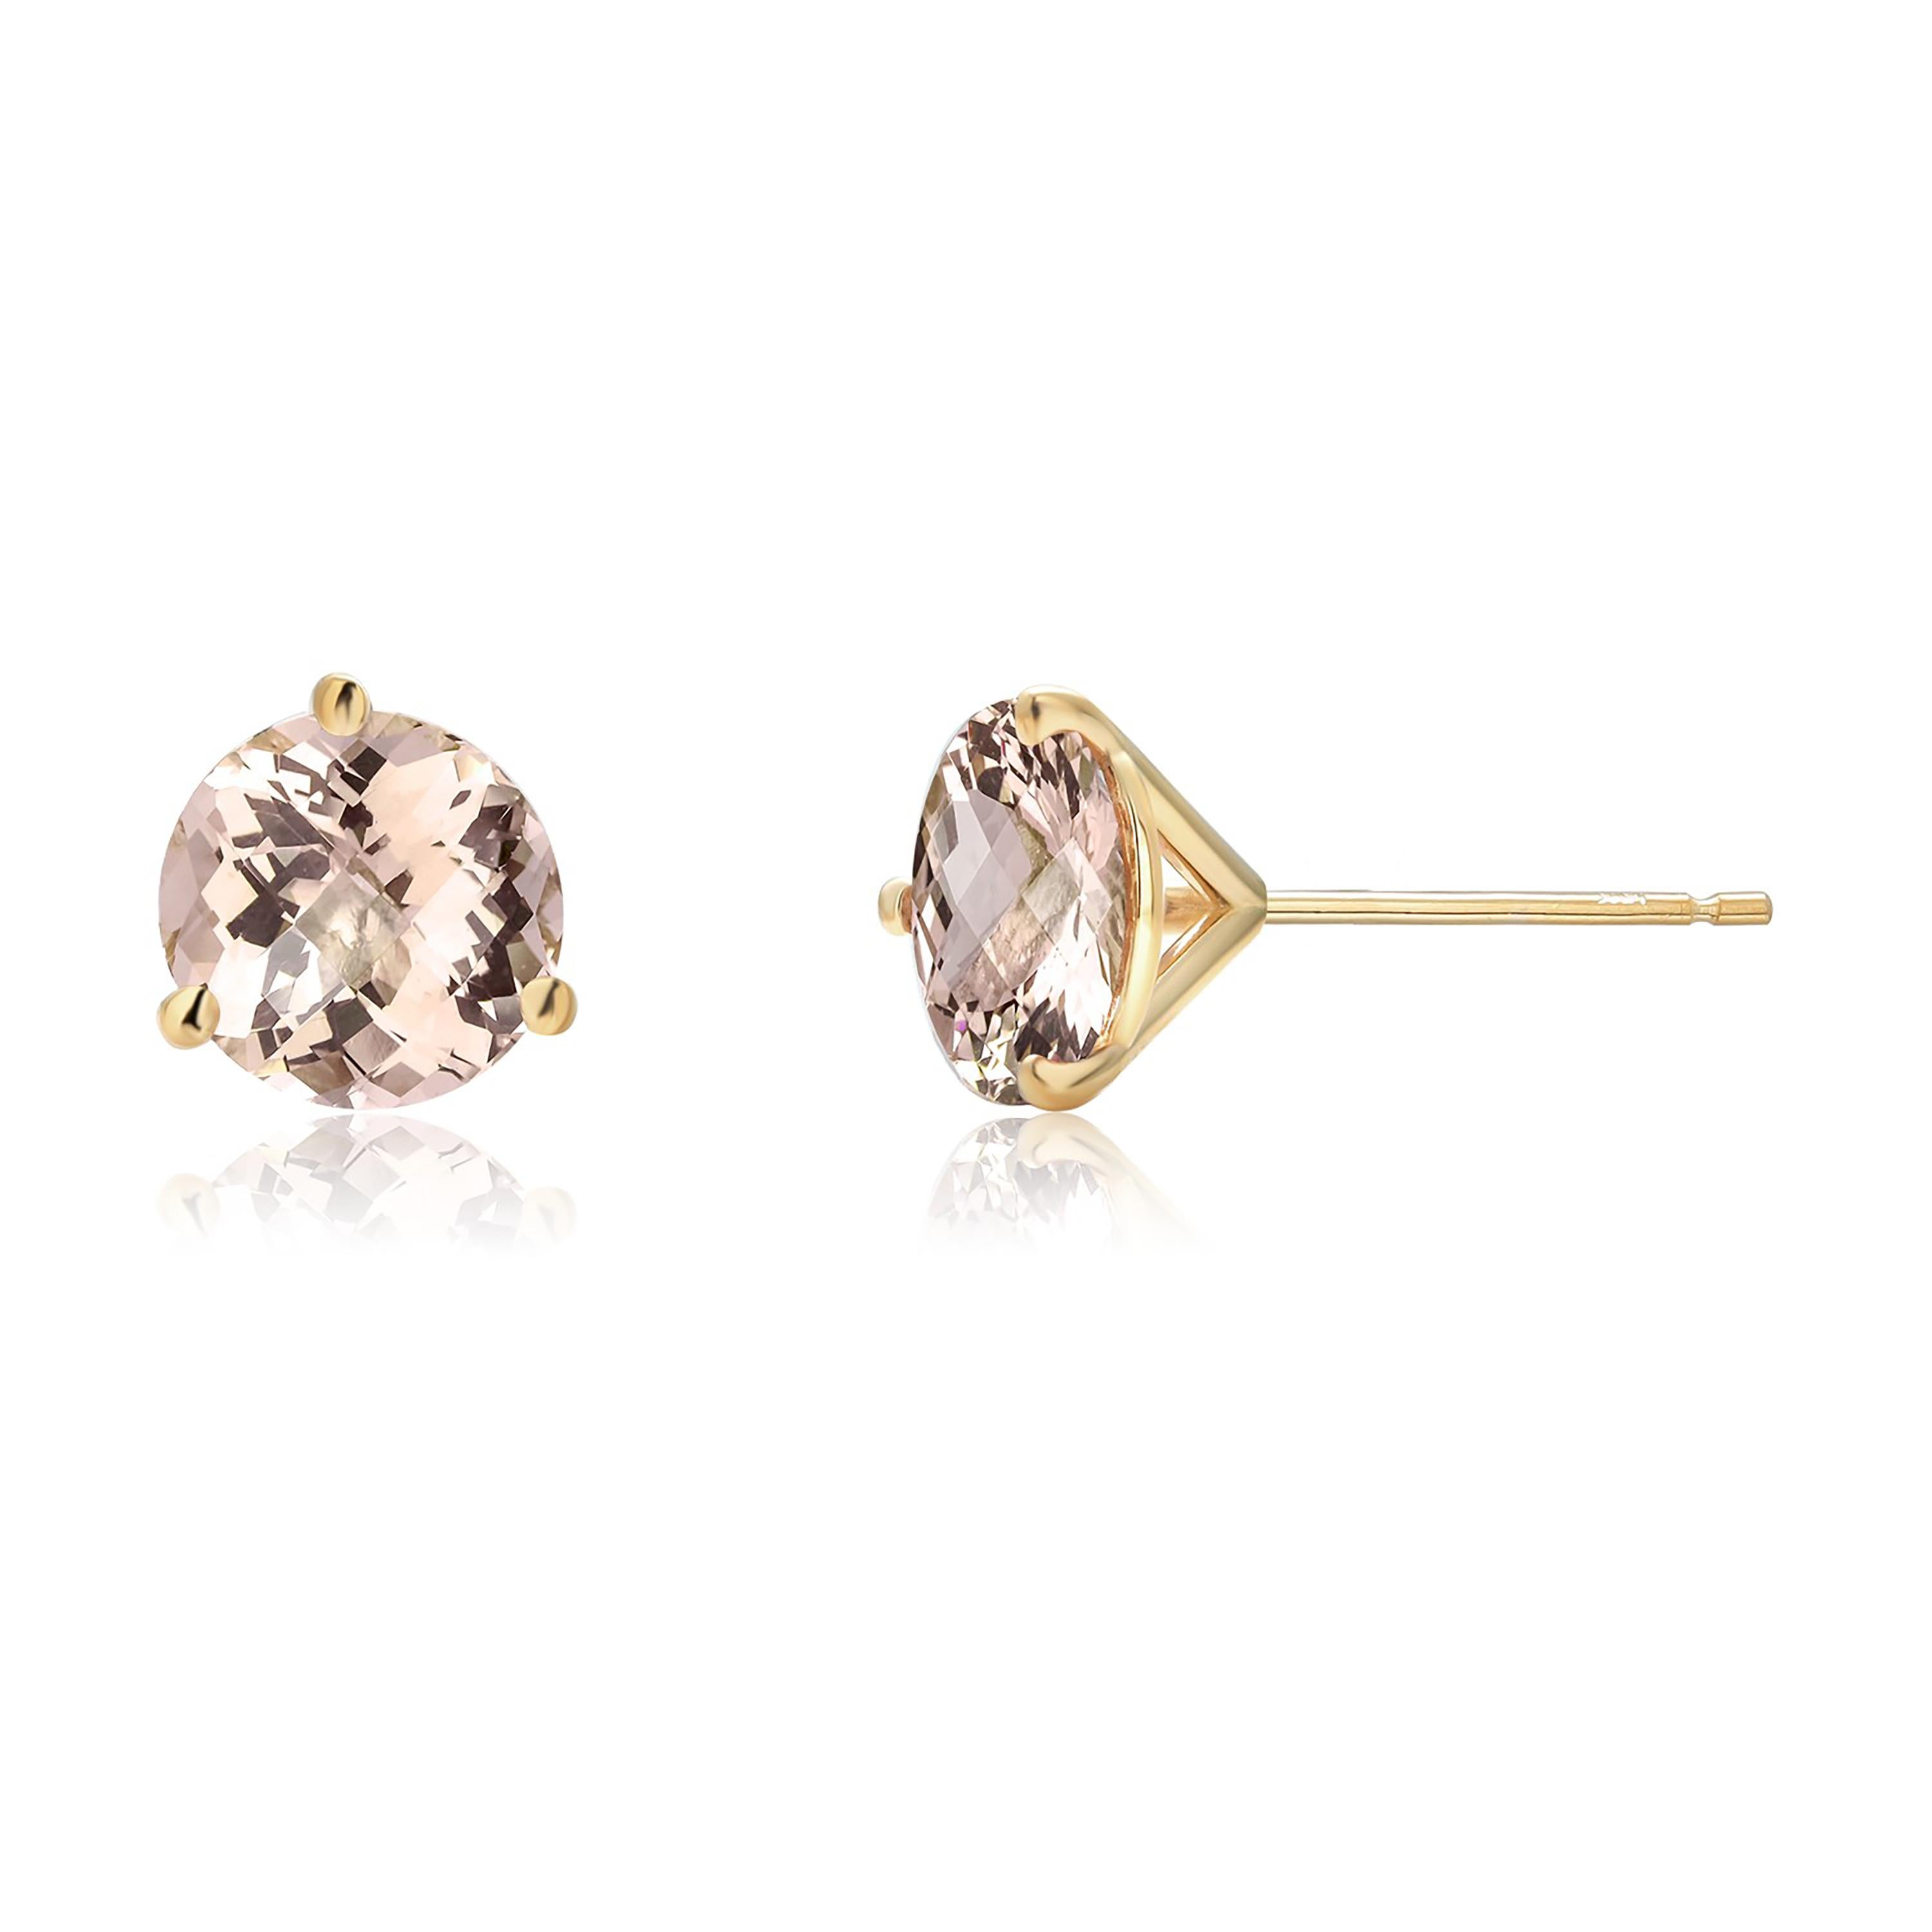 Round Cut Round Shaped Morganite 0.30 Inch Diameter Set in Yellow Gold Stud Earrings 